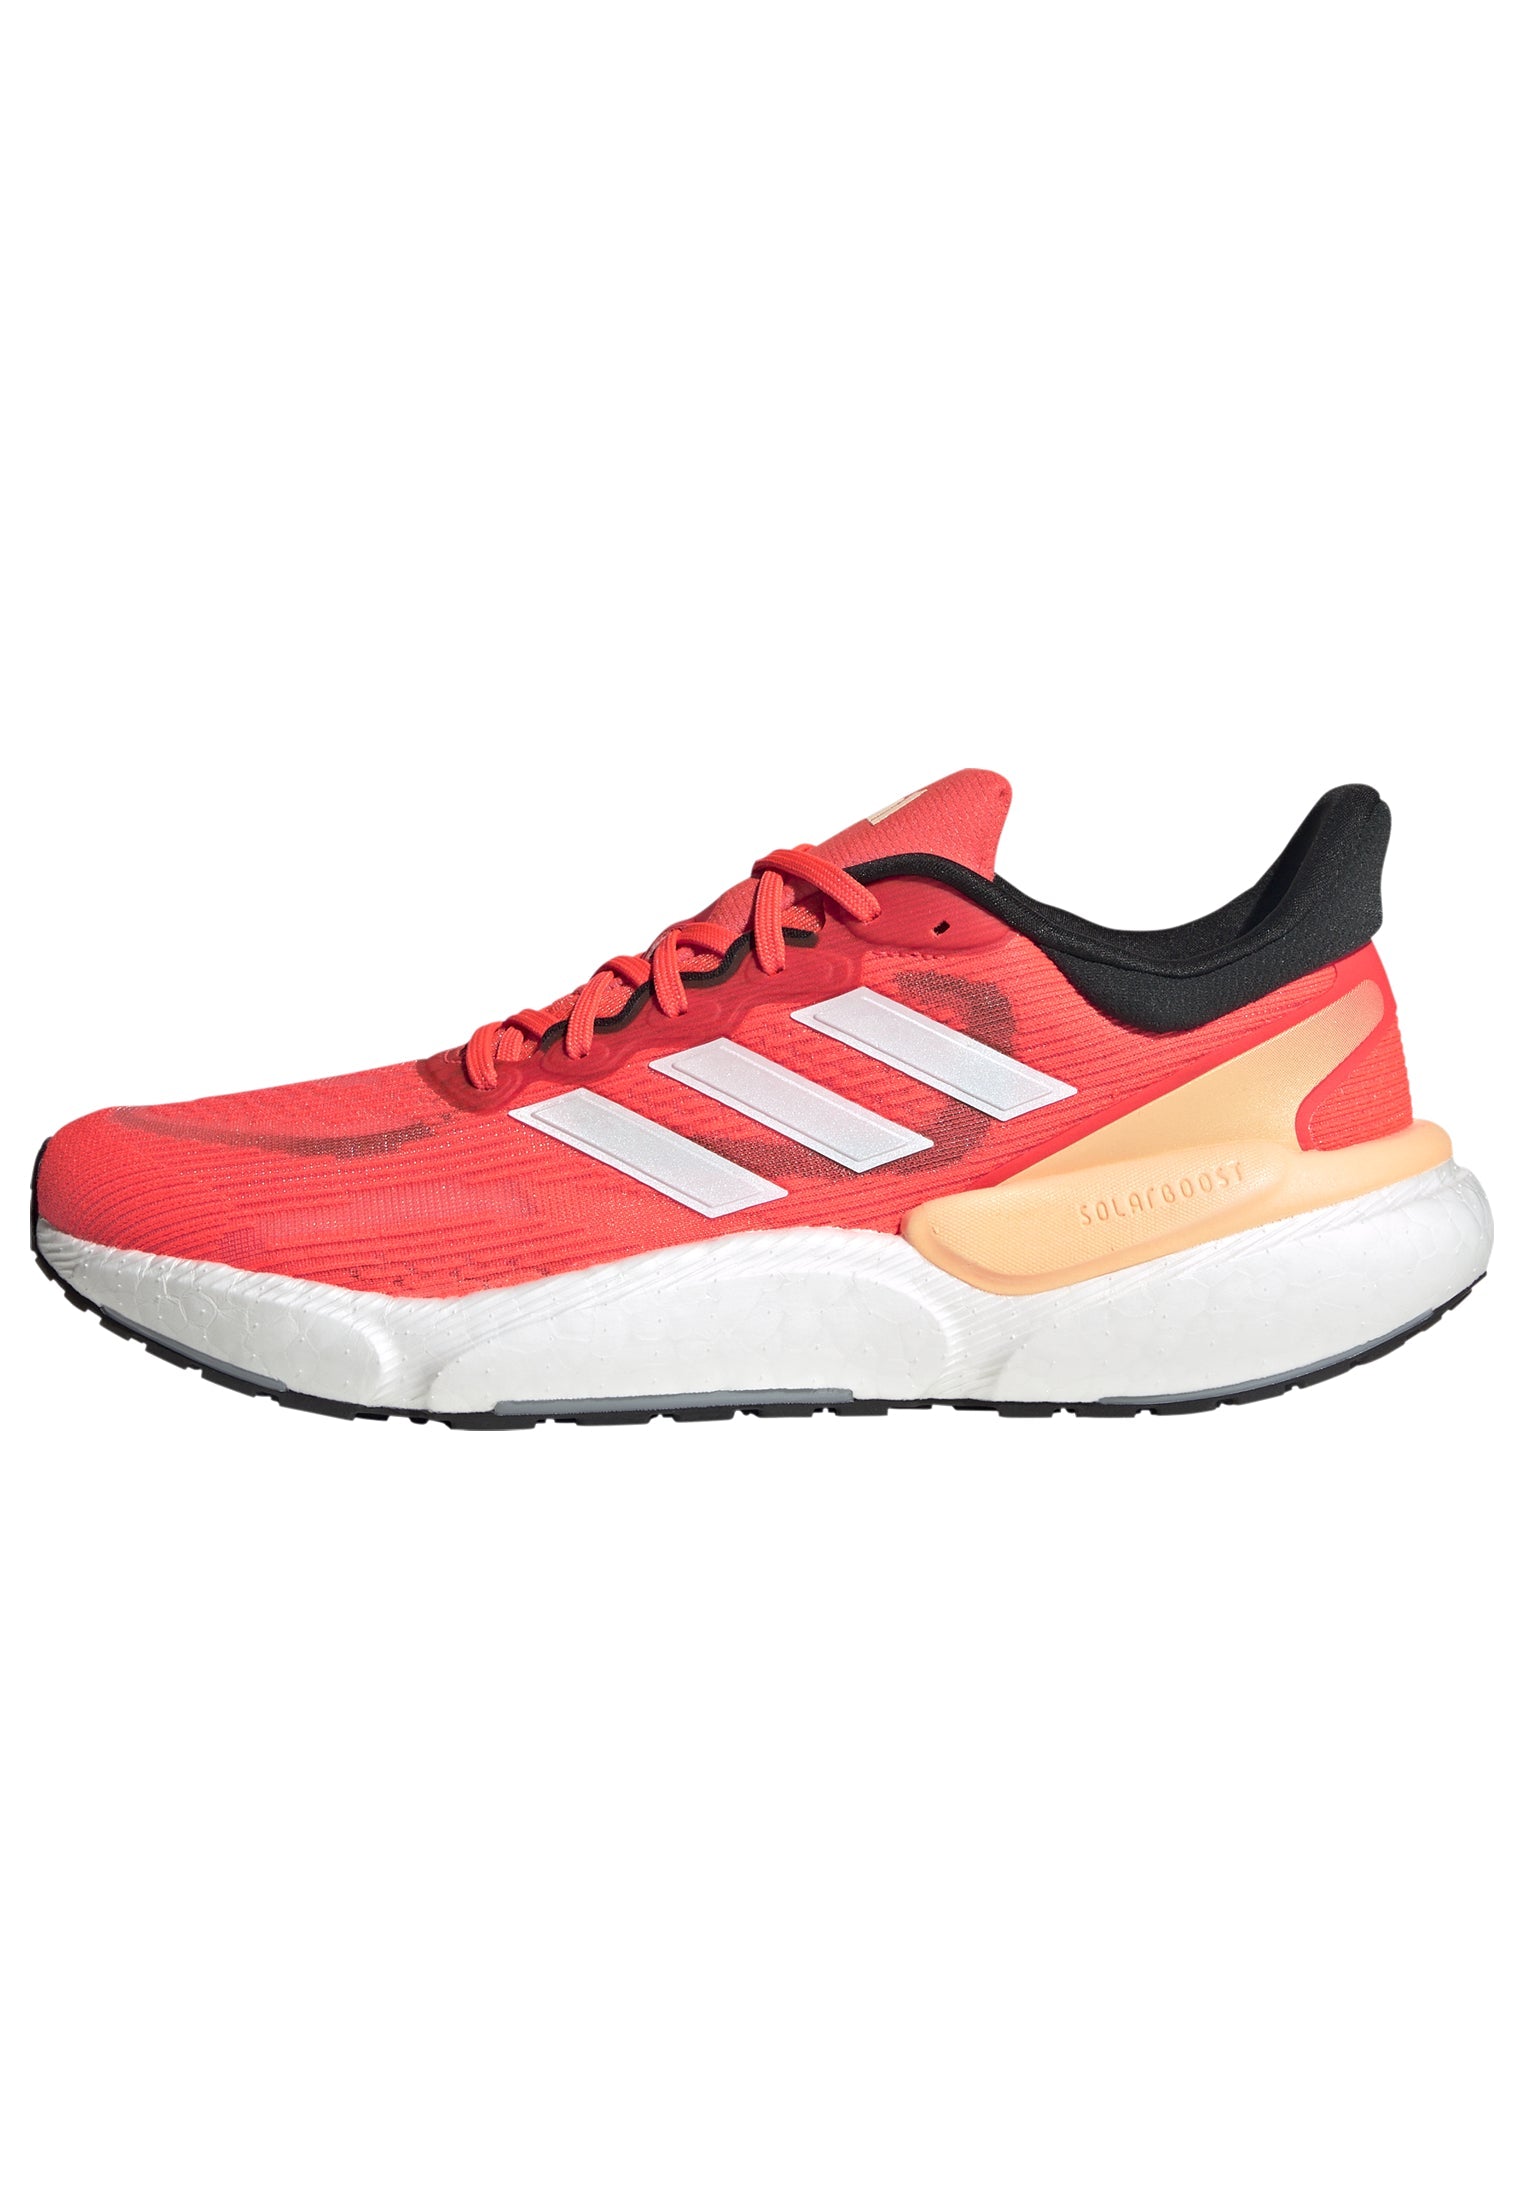 ADIDAS SOLARBOOST 5 M GV9137 RUNNING SHOES (M)